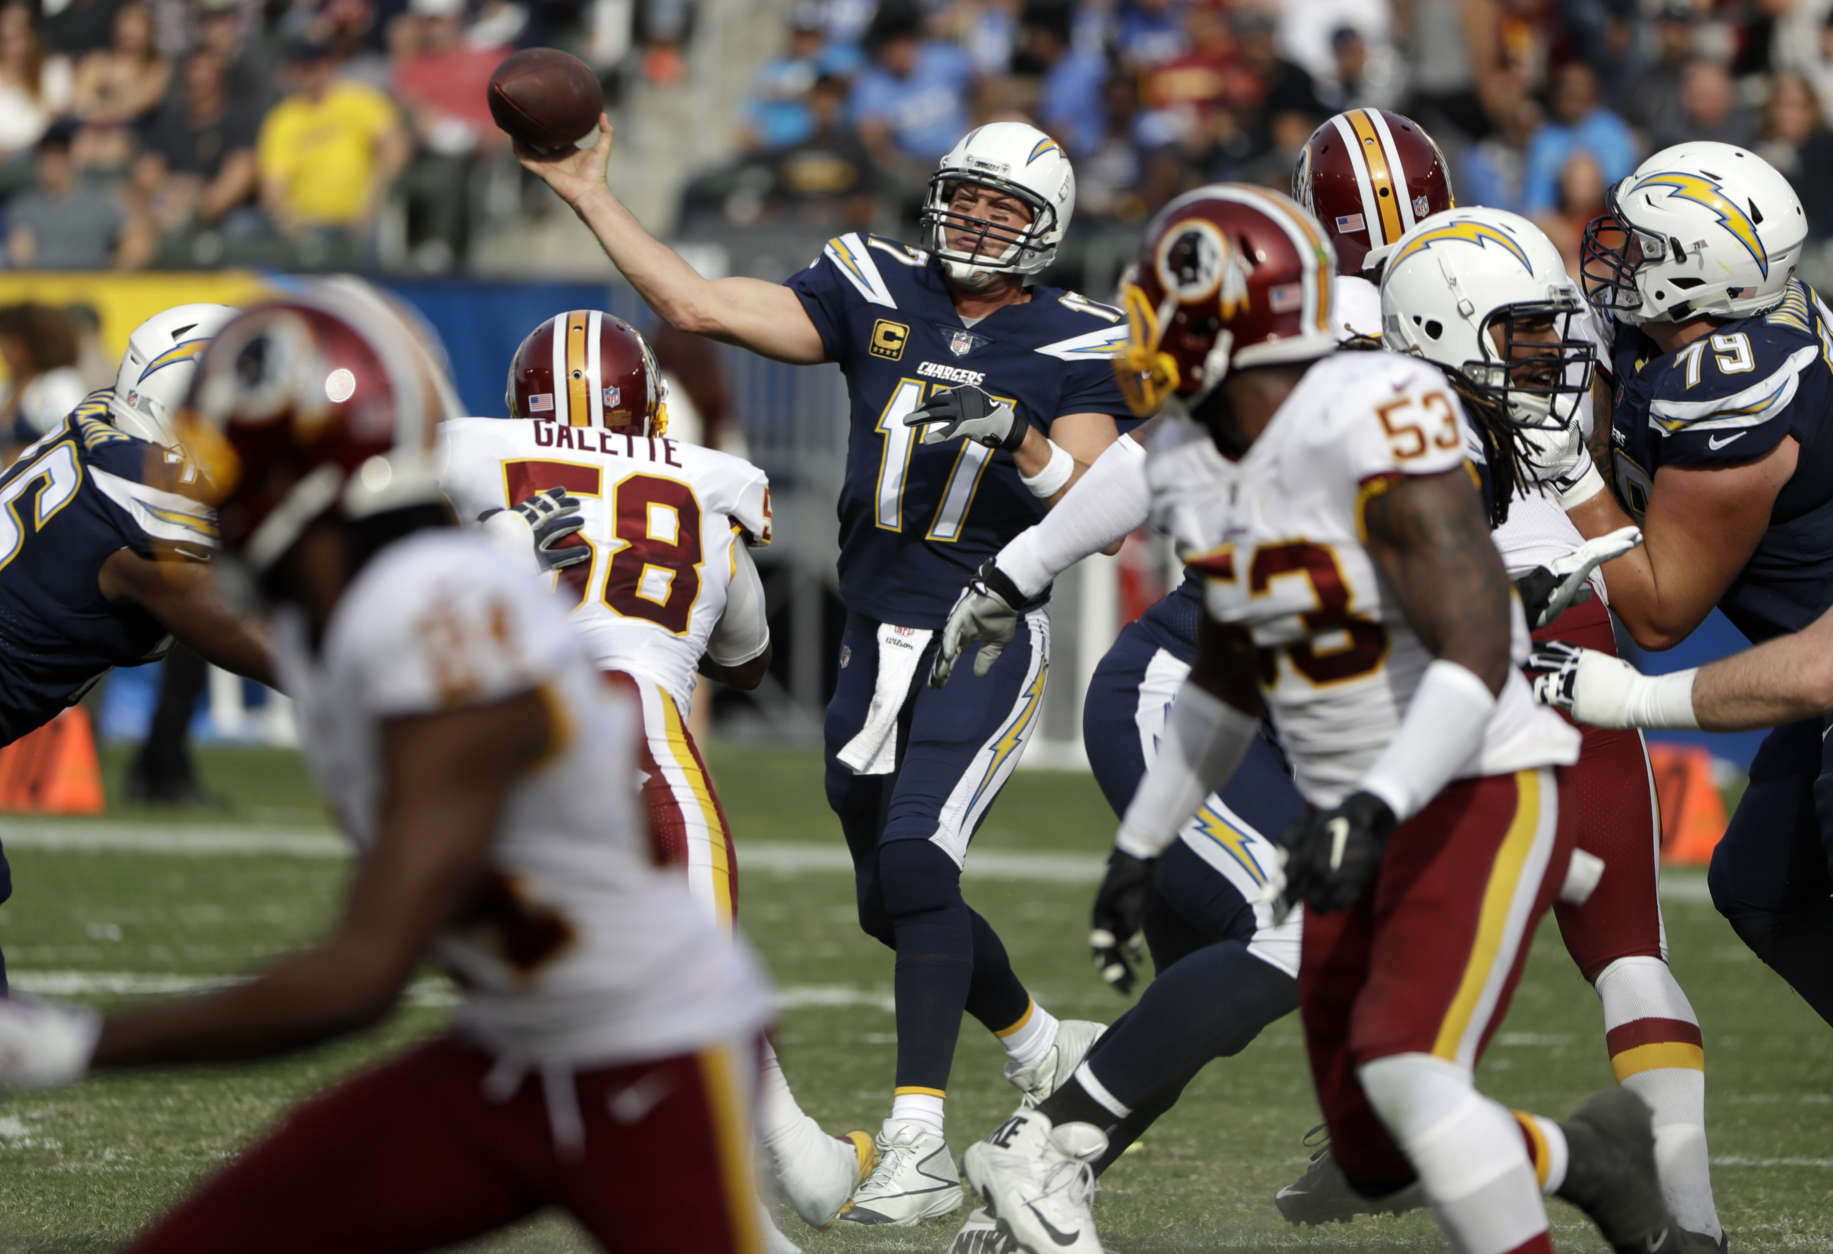 Los Angeles Chargers quarterback Philip Rivers throws a pass during the first half of an NFL football game against the Washington Redskins, Sunday, Dec. 10, 2017, in Carson, Calif. (AP Photo/Alex Gallardo)